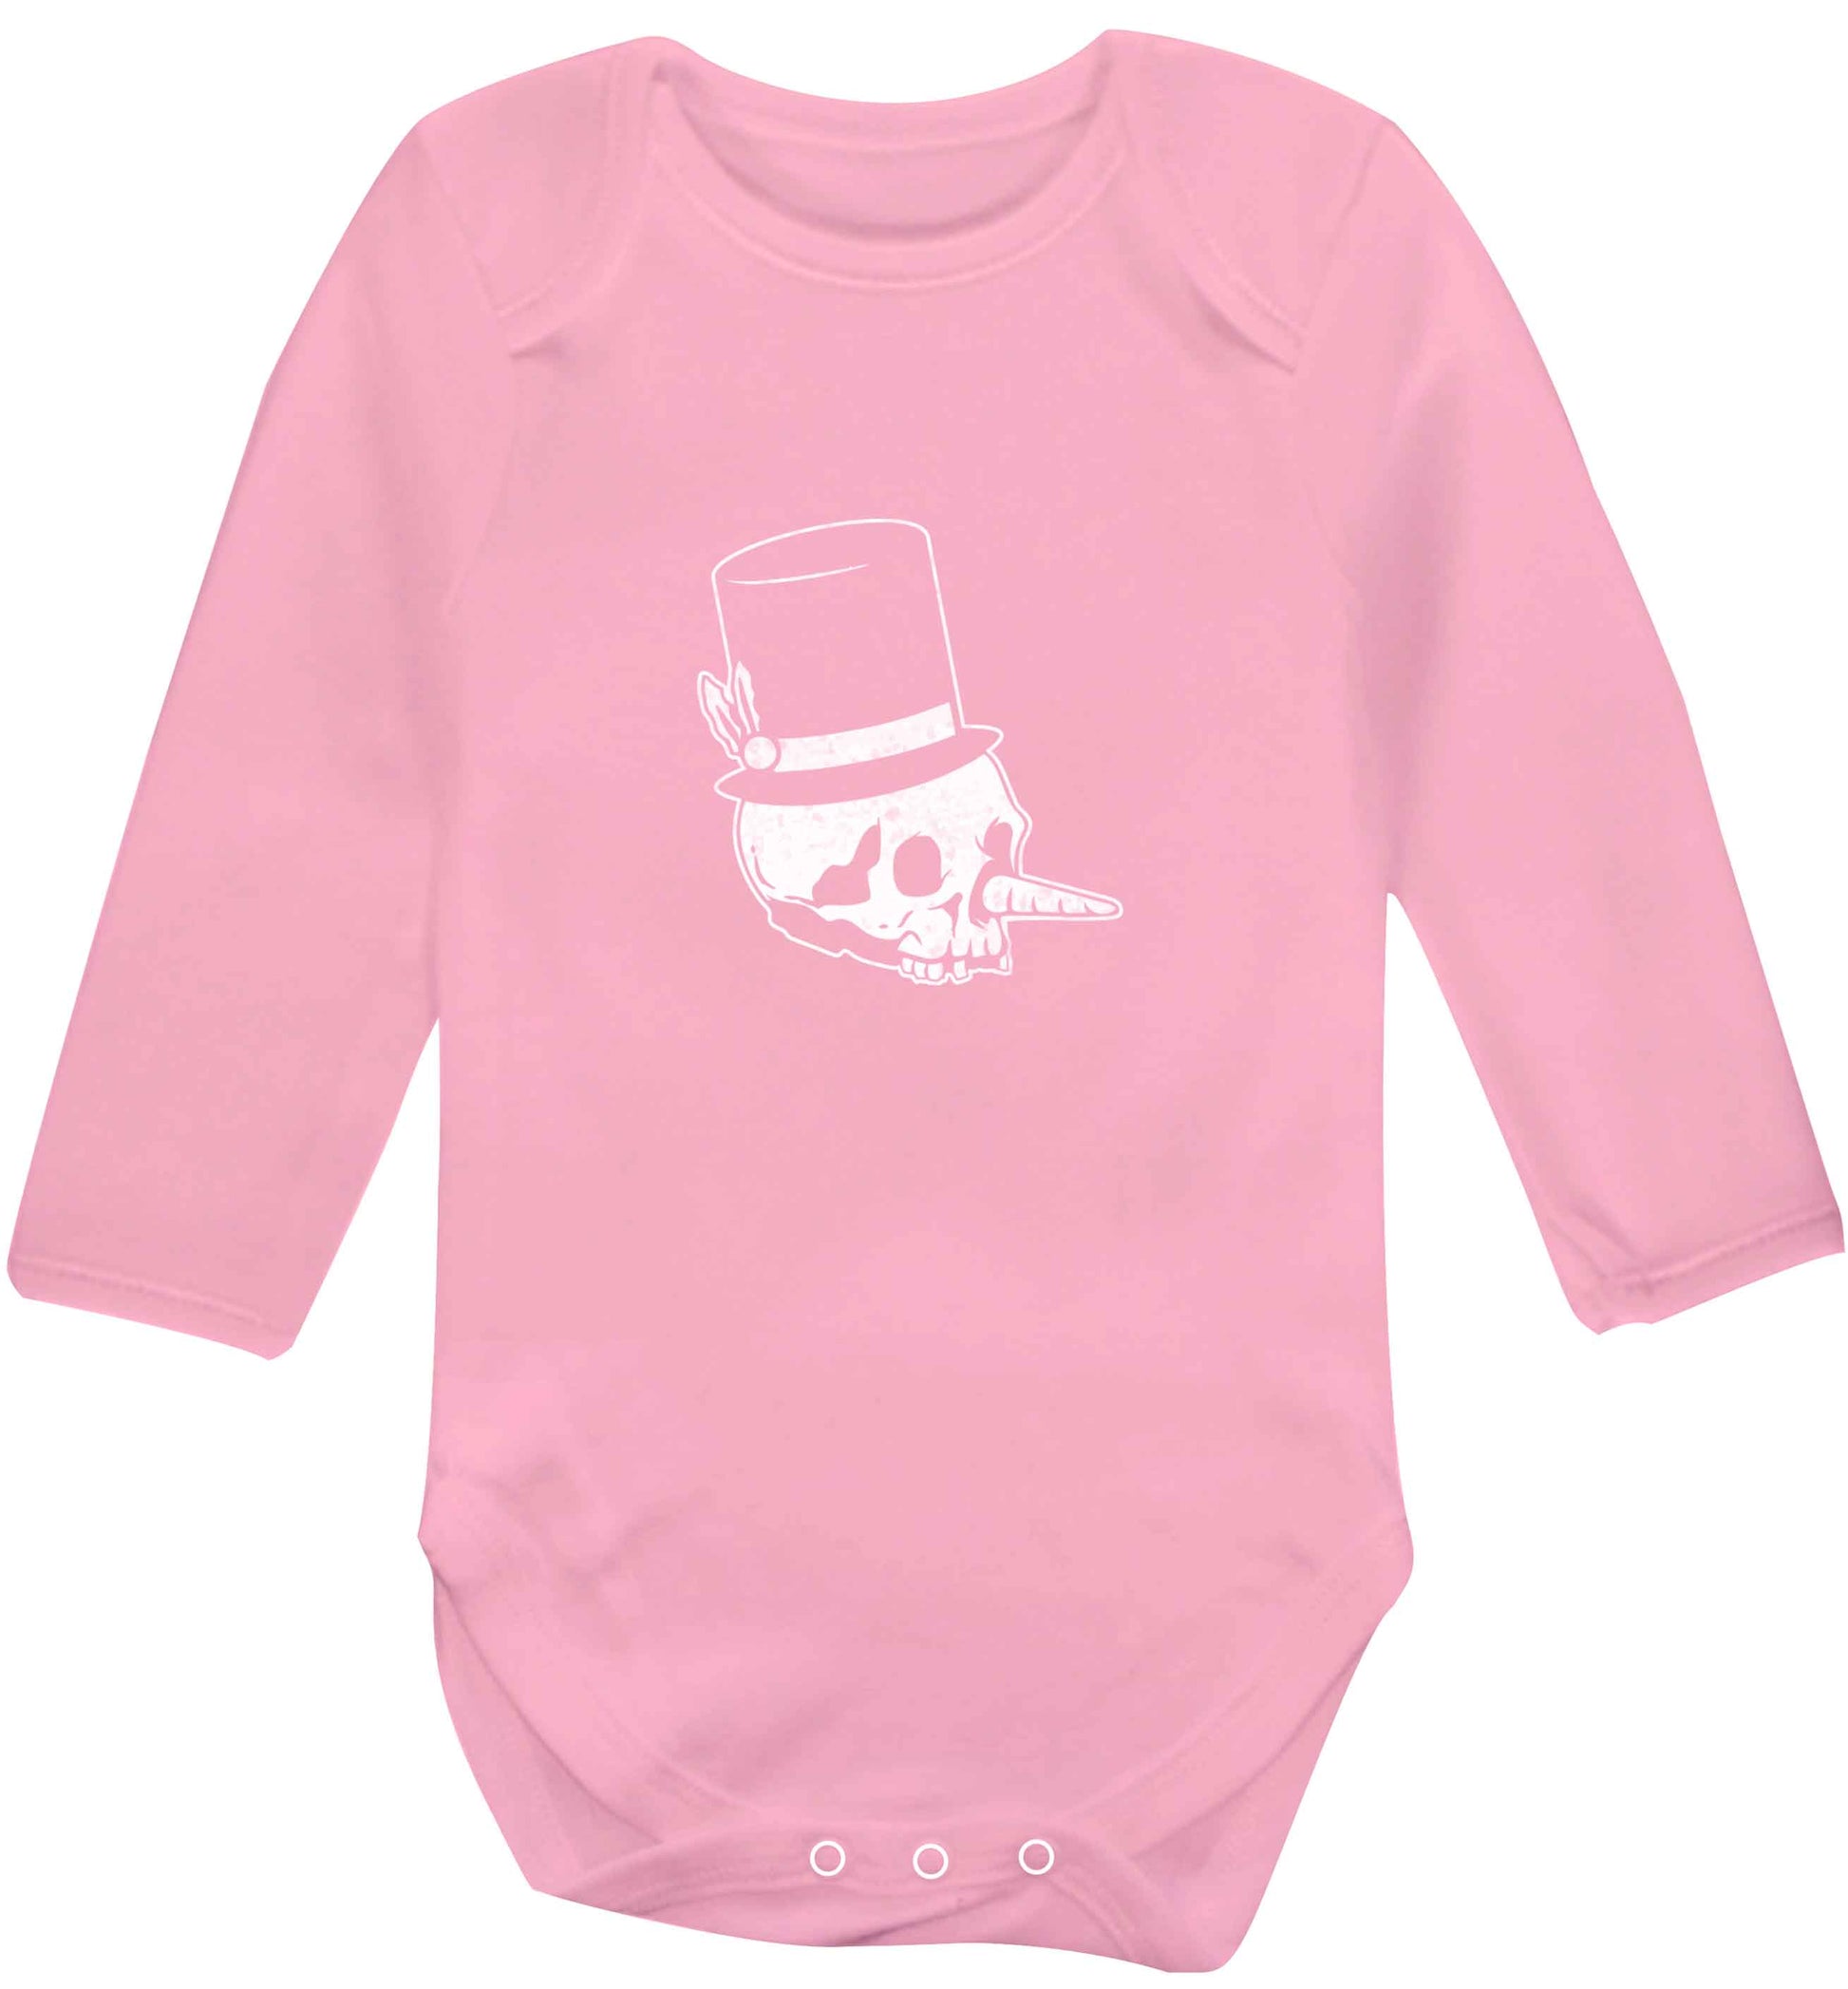 Snowman punk baby vest long sleeved pale pink 6-12 months